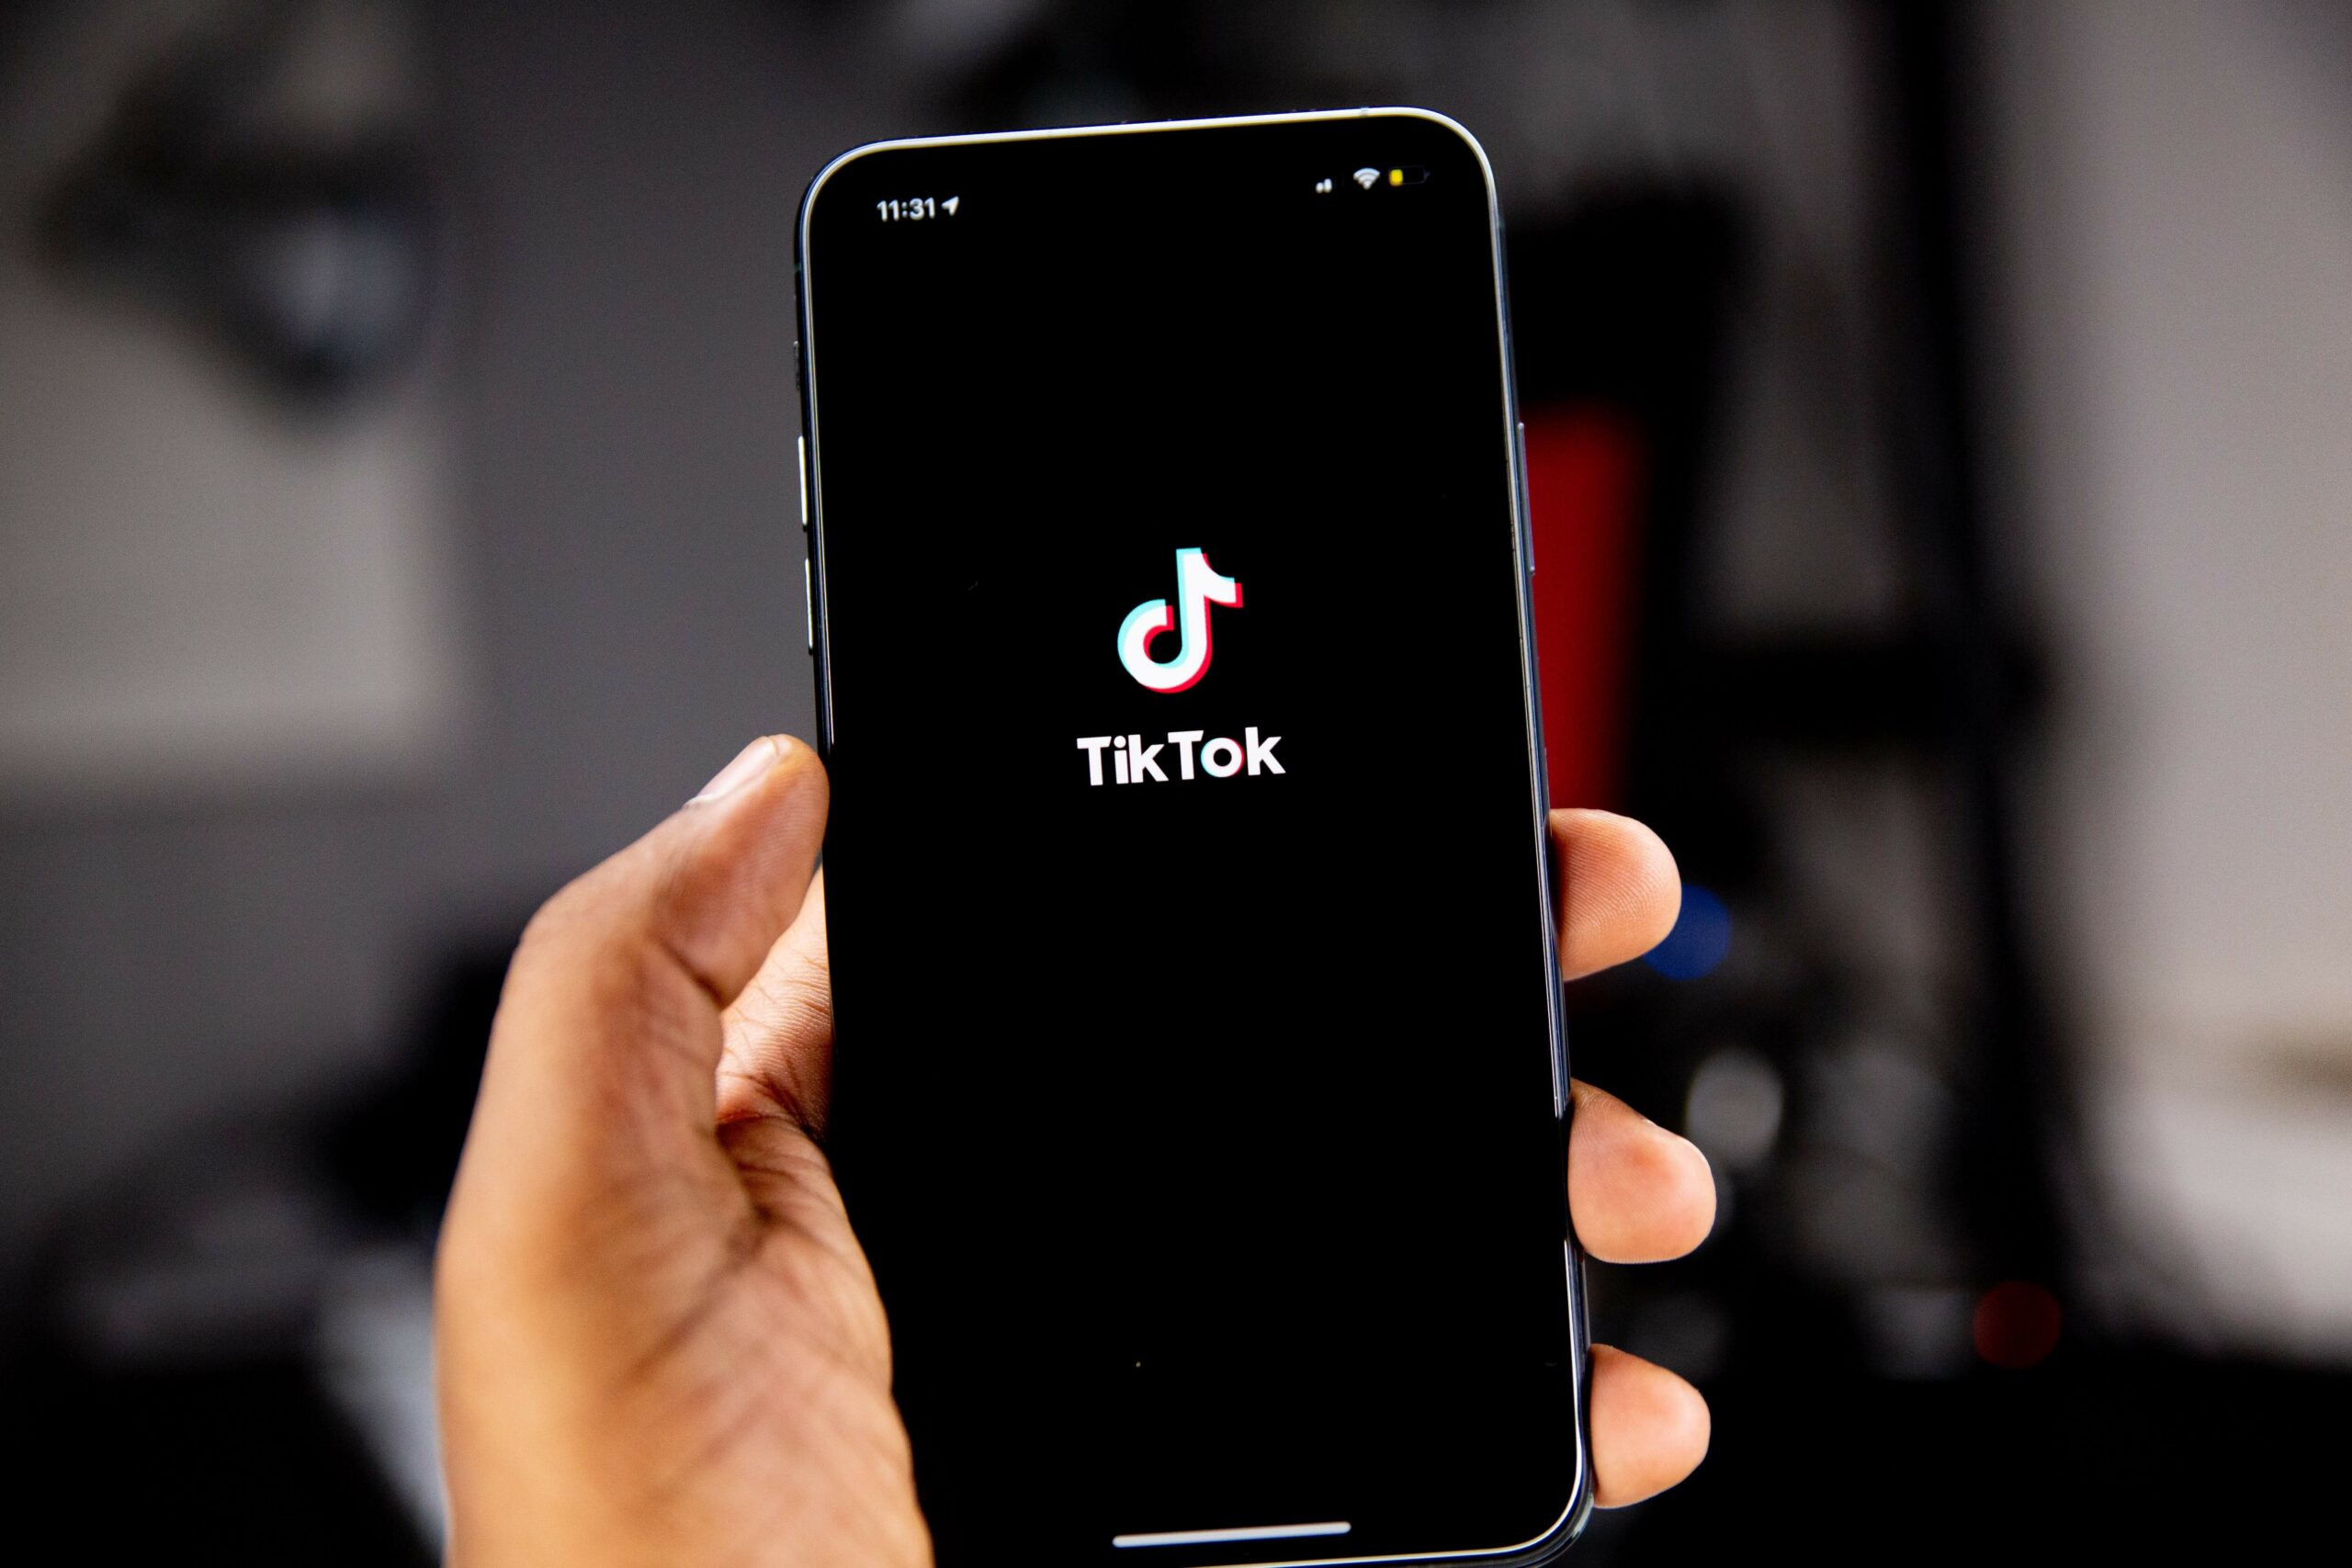 Tiktok may be a powerful social networking site, particularly for the Generation Z demographic